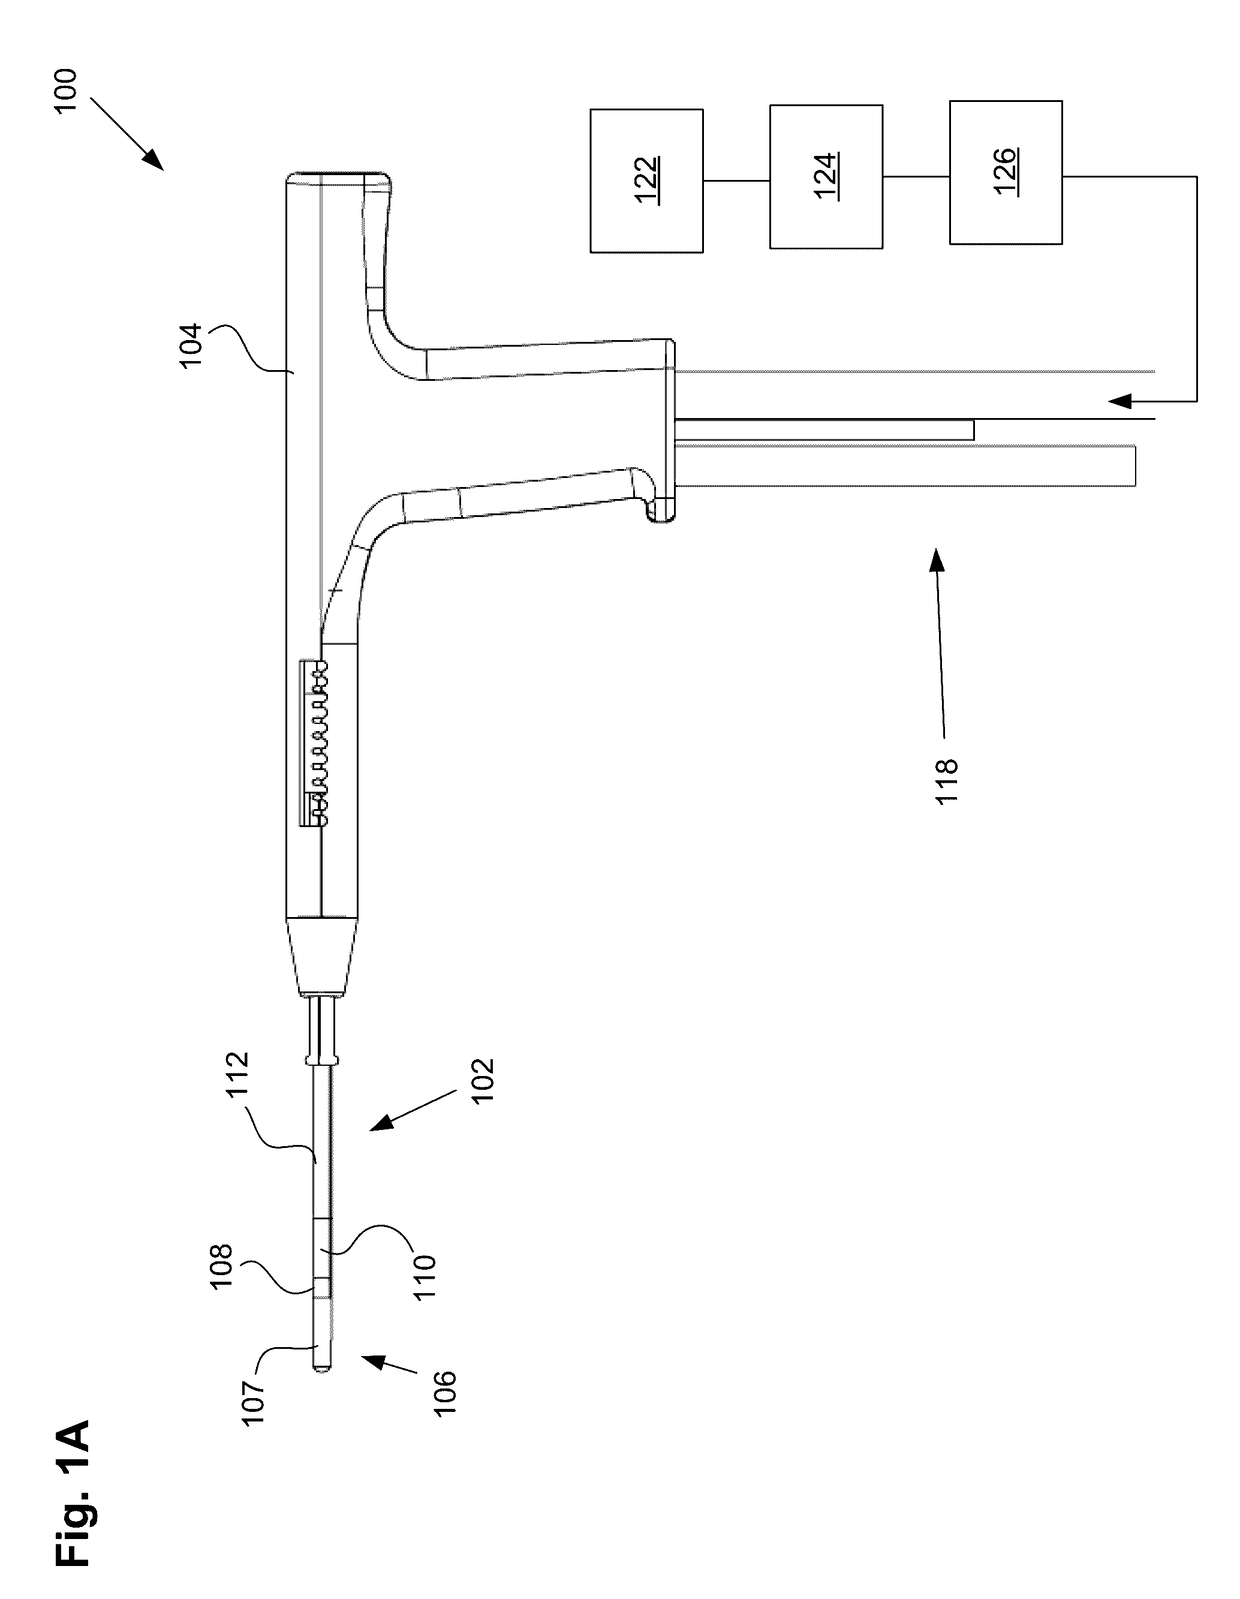 Integrity testing method and apparatus for delivering vapor to the uterus